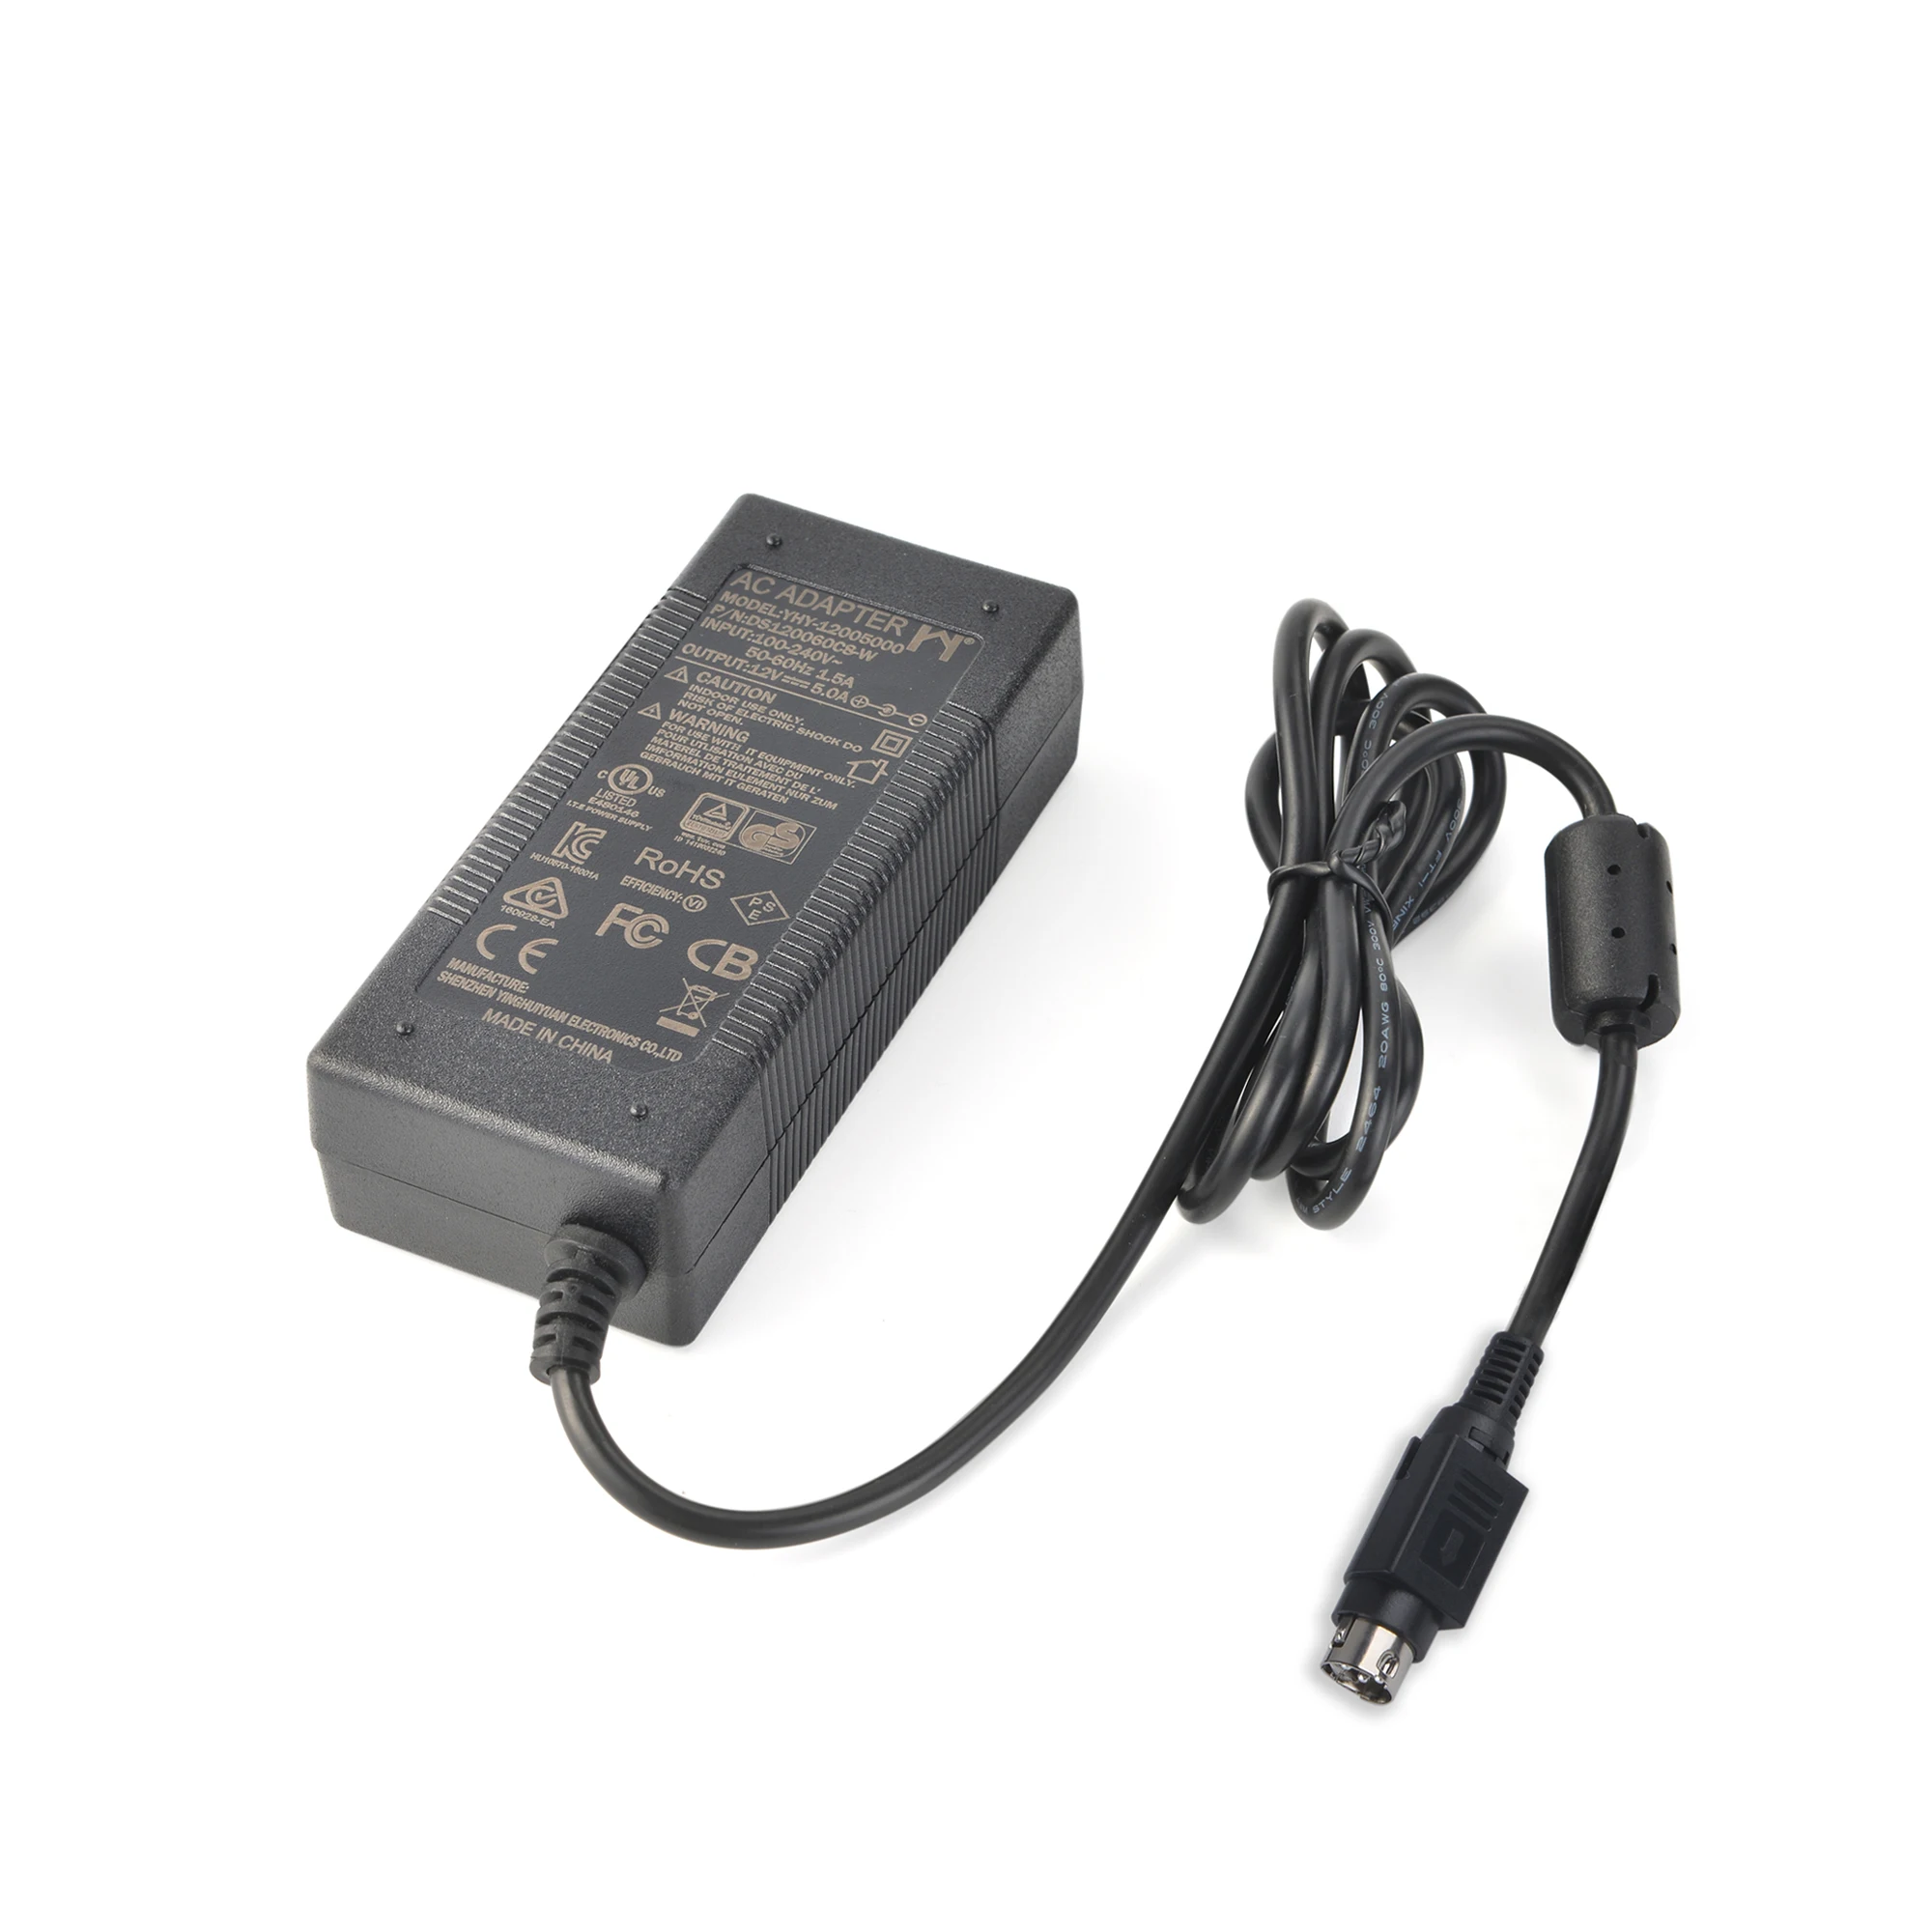 LED 12V 3A ADAPTER POWER SUPPLY 36W cUL Listed Class 2 Power Supply 